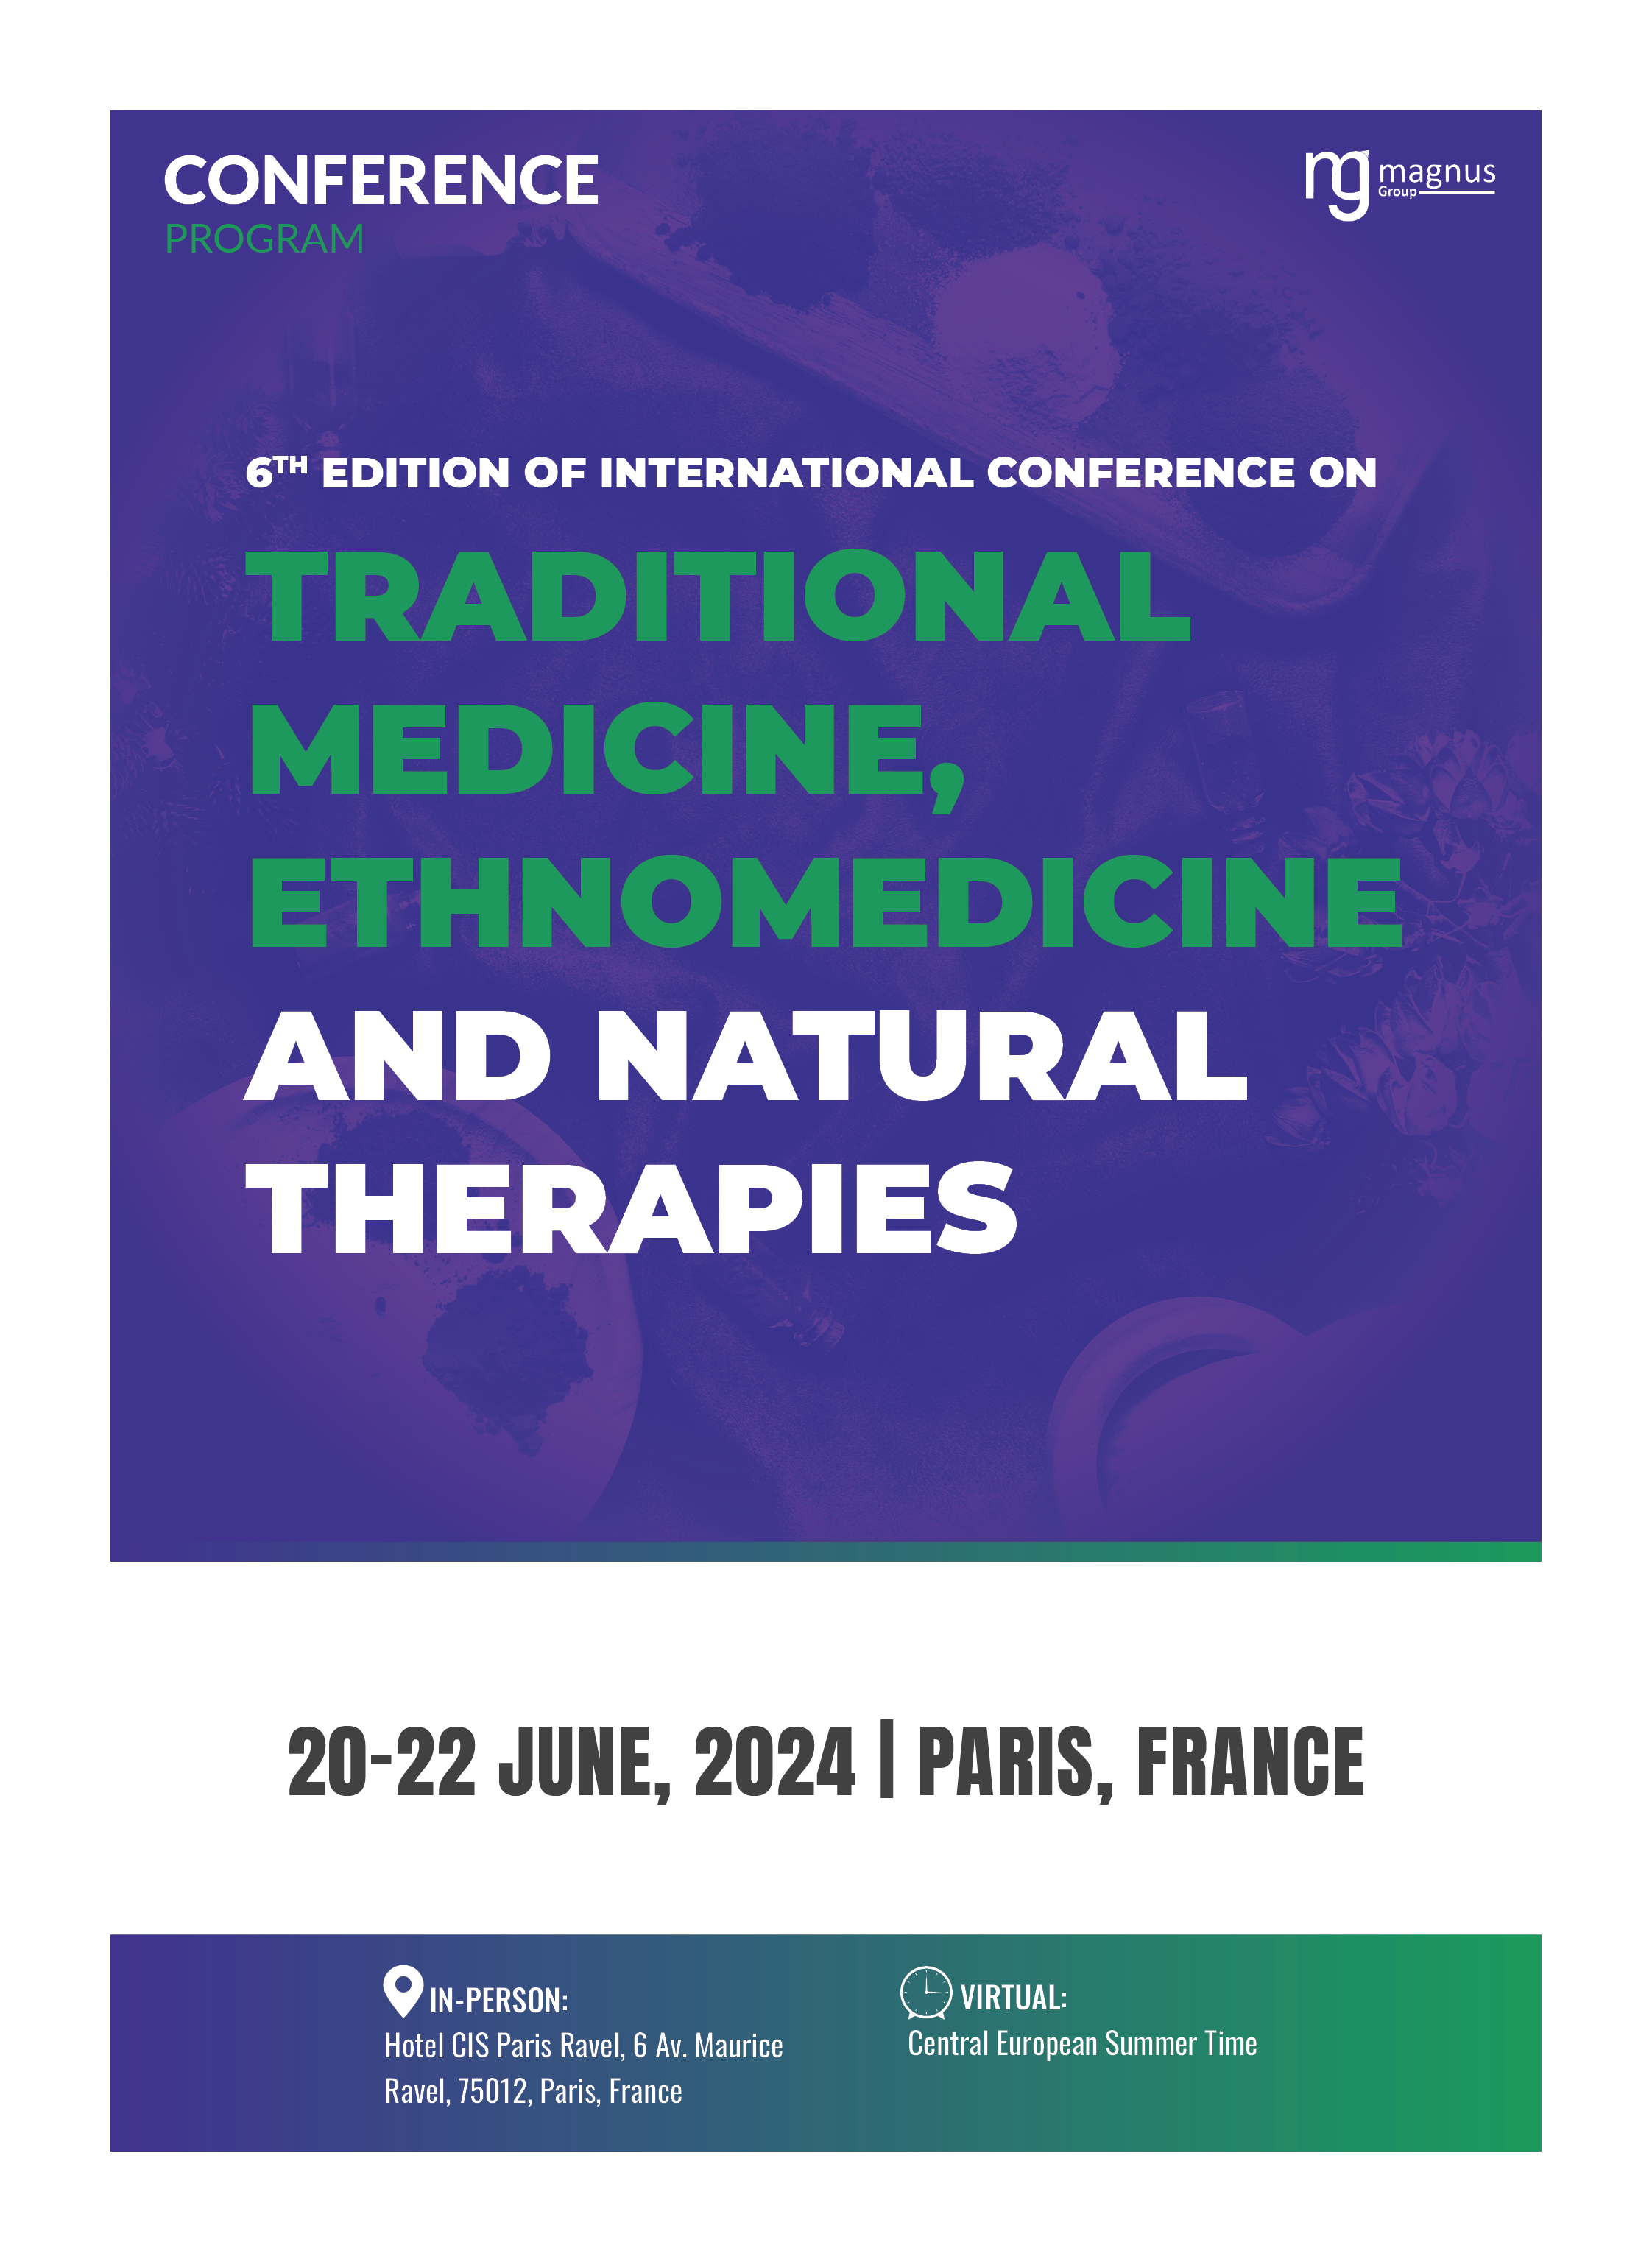 6th Edition of International Conference on Traditional Medicine, Ethnomedicine and Natural Therapies | Paris, France Program